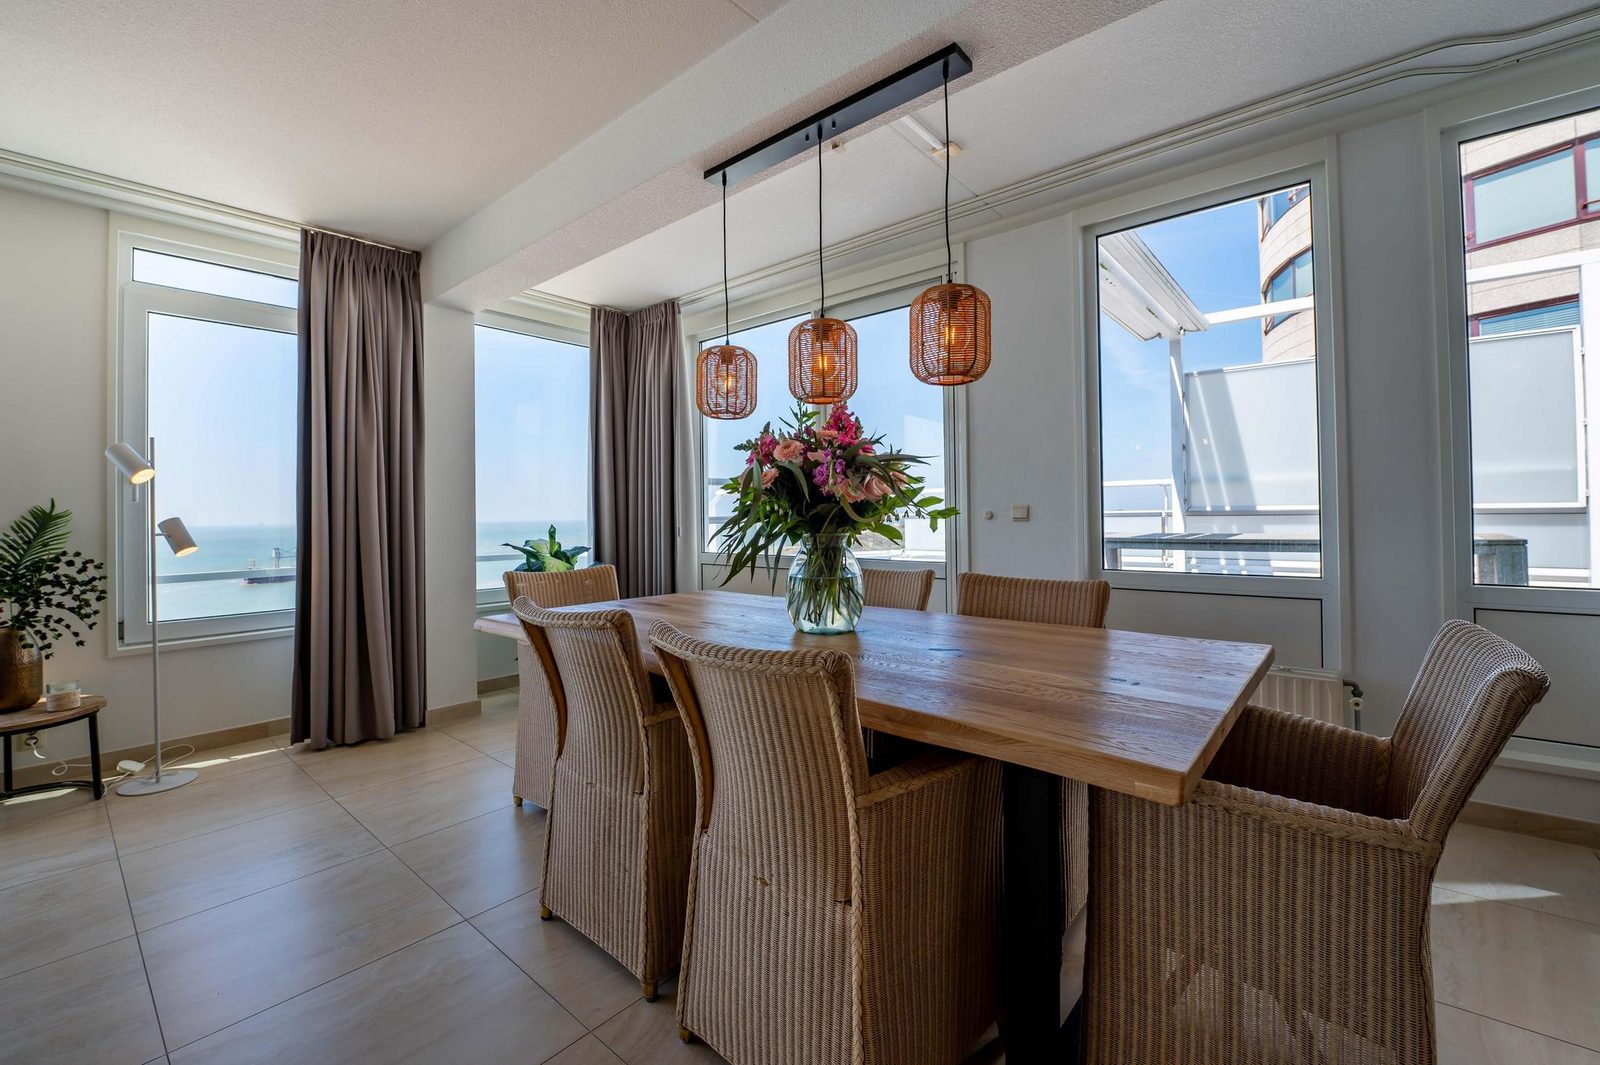 Penthouse 750 with ocean view